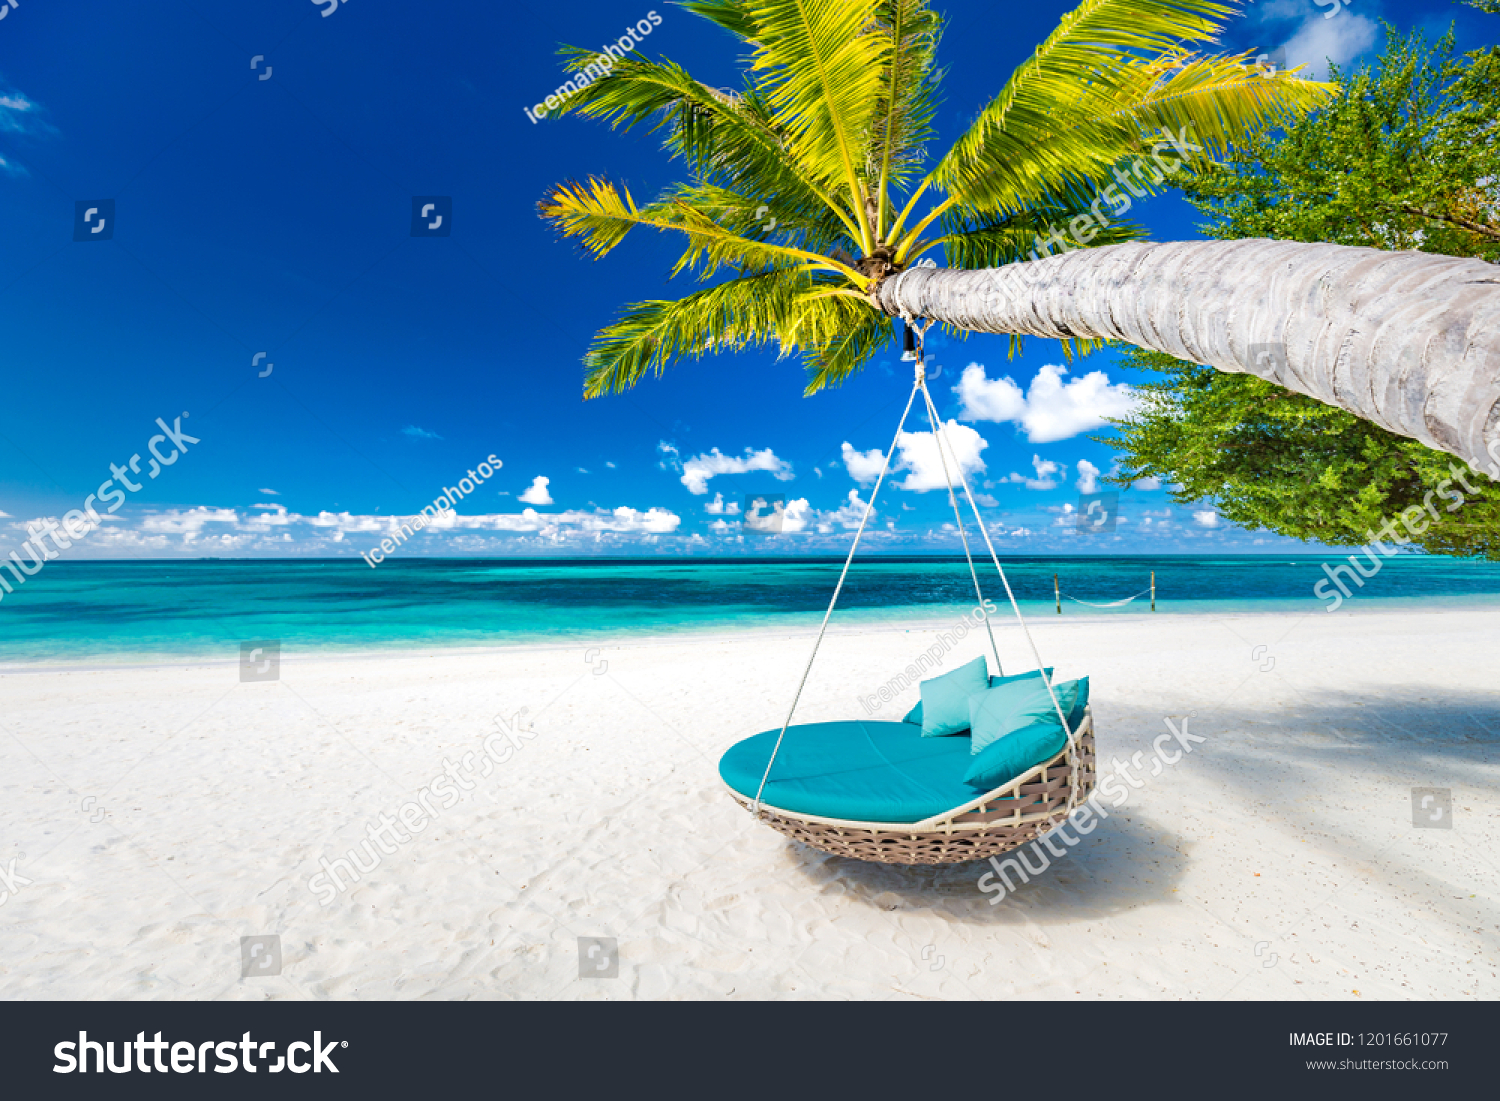 Maldives Holiday Resort Seaside Villas 10x6.5ft Photography Backdrop Summer Holiday Tropical Beach Starw Pavilion Relaxing Time Blue Skyline Background Nature Landscape 